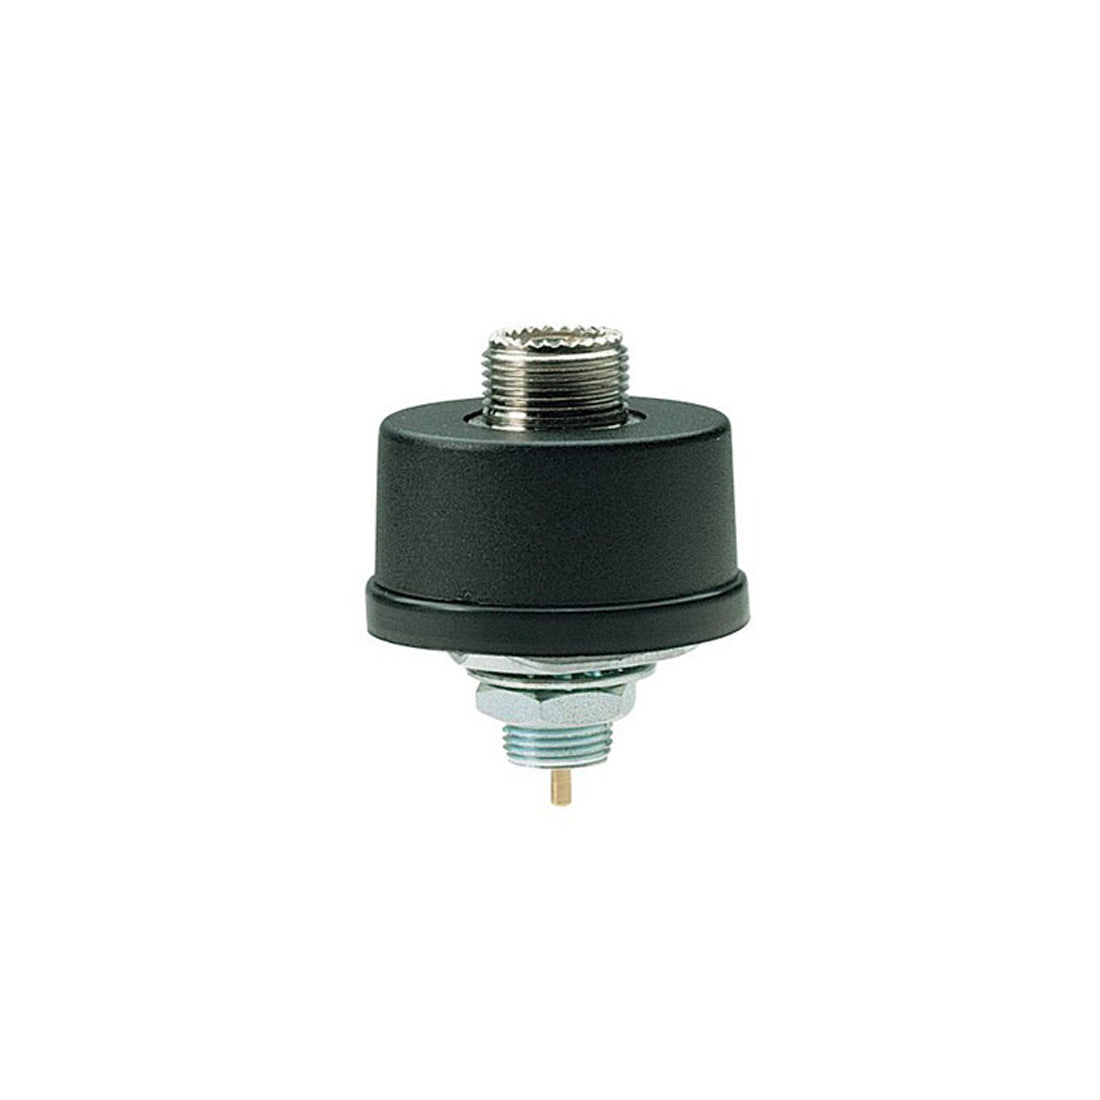 Midland Center-roof adapter for antennas with PL connection support for DV 27 PL, adapter for CB antennas